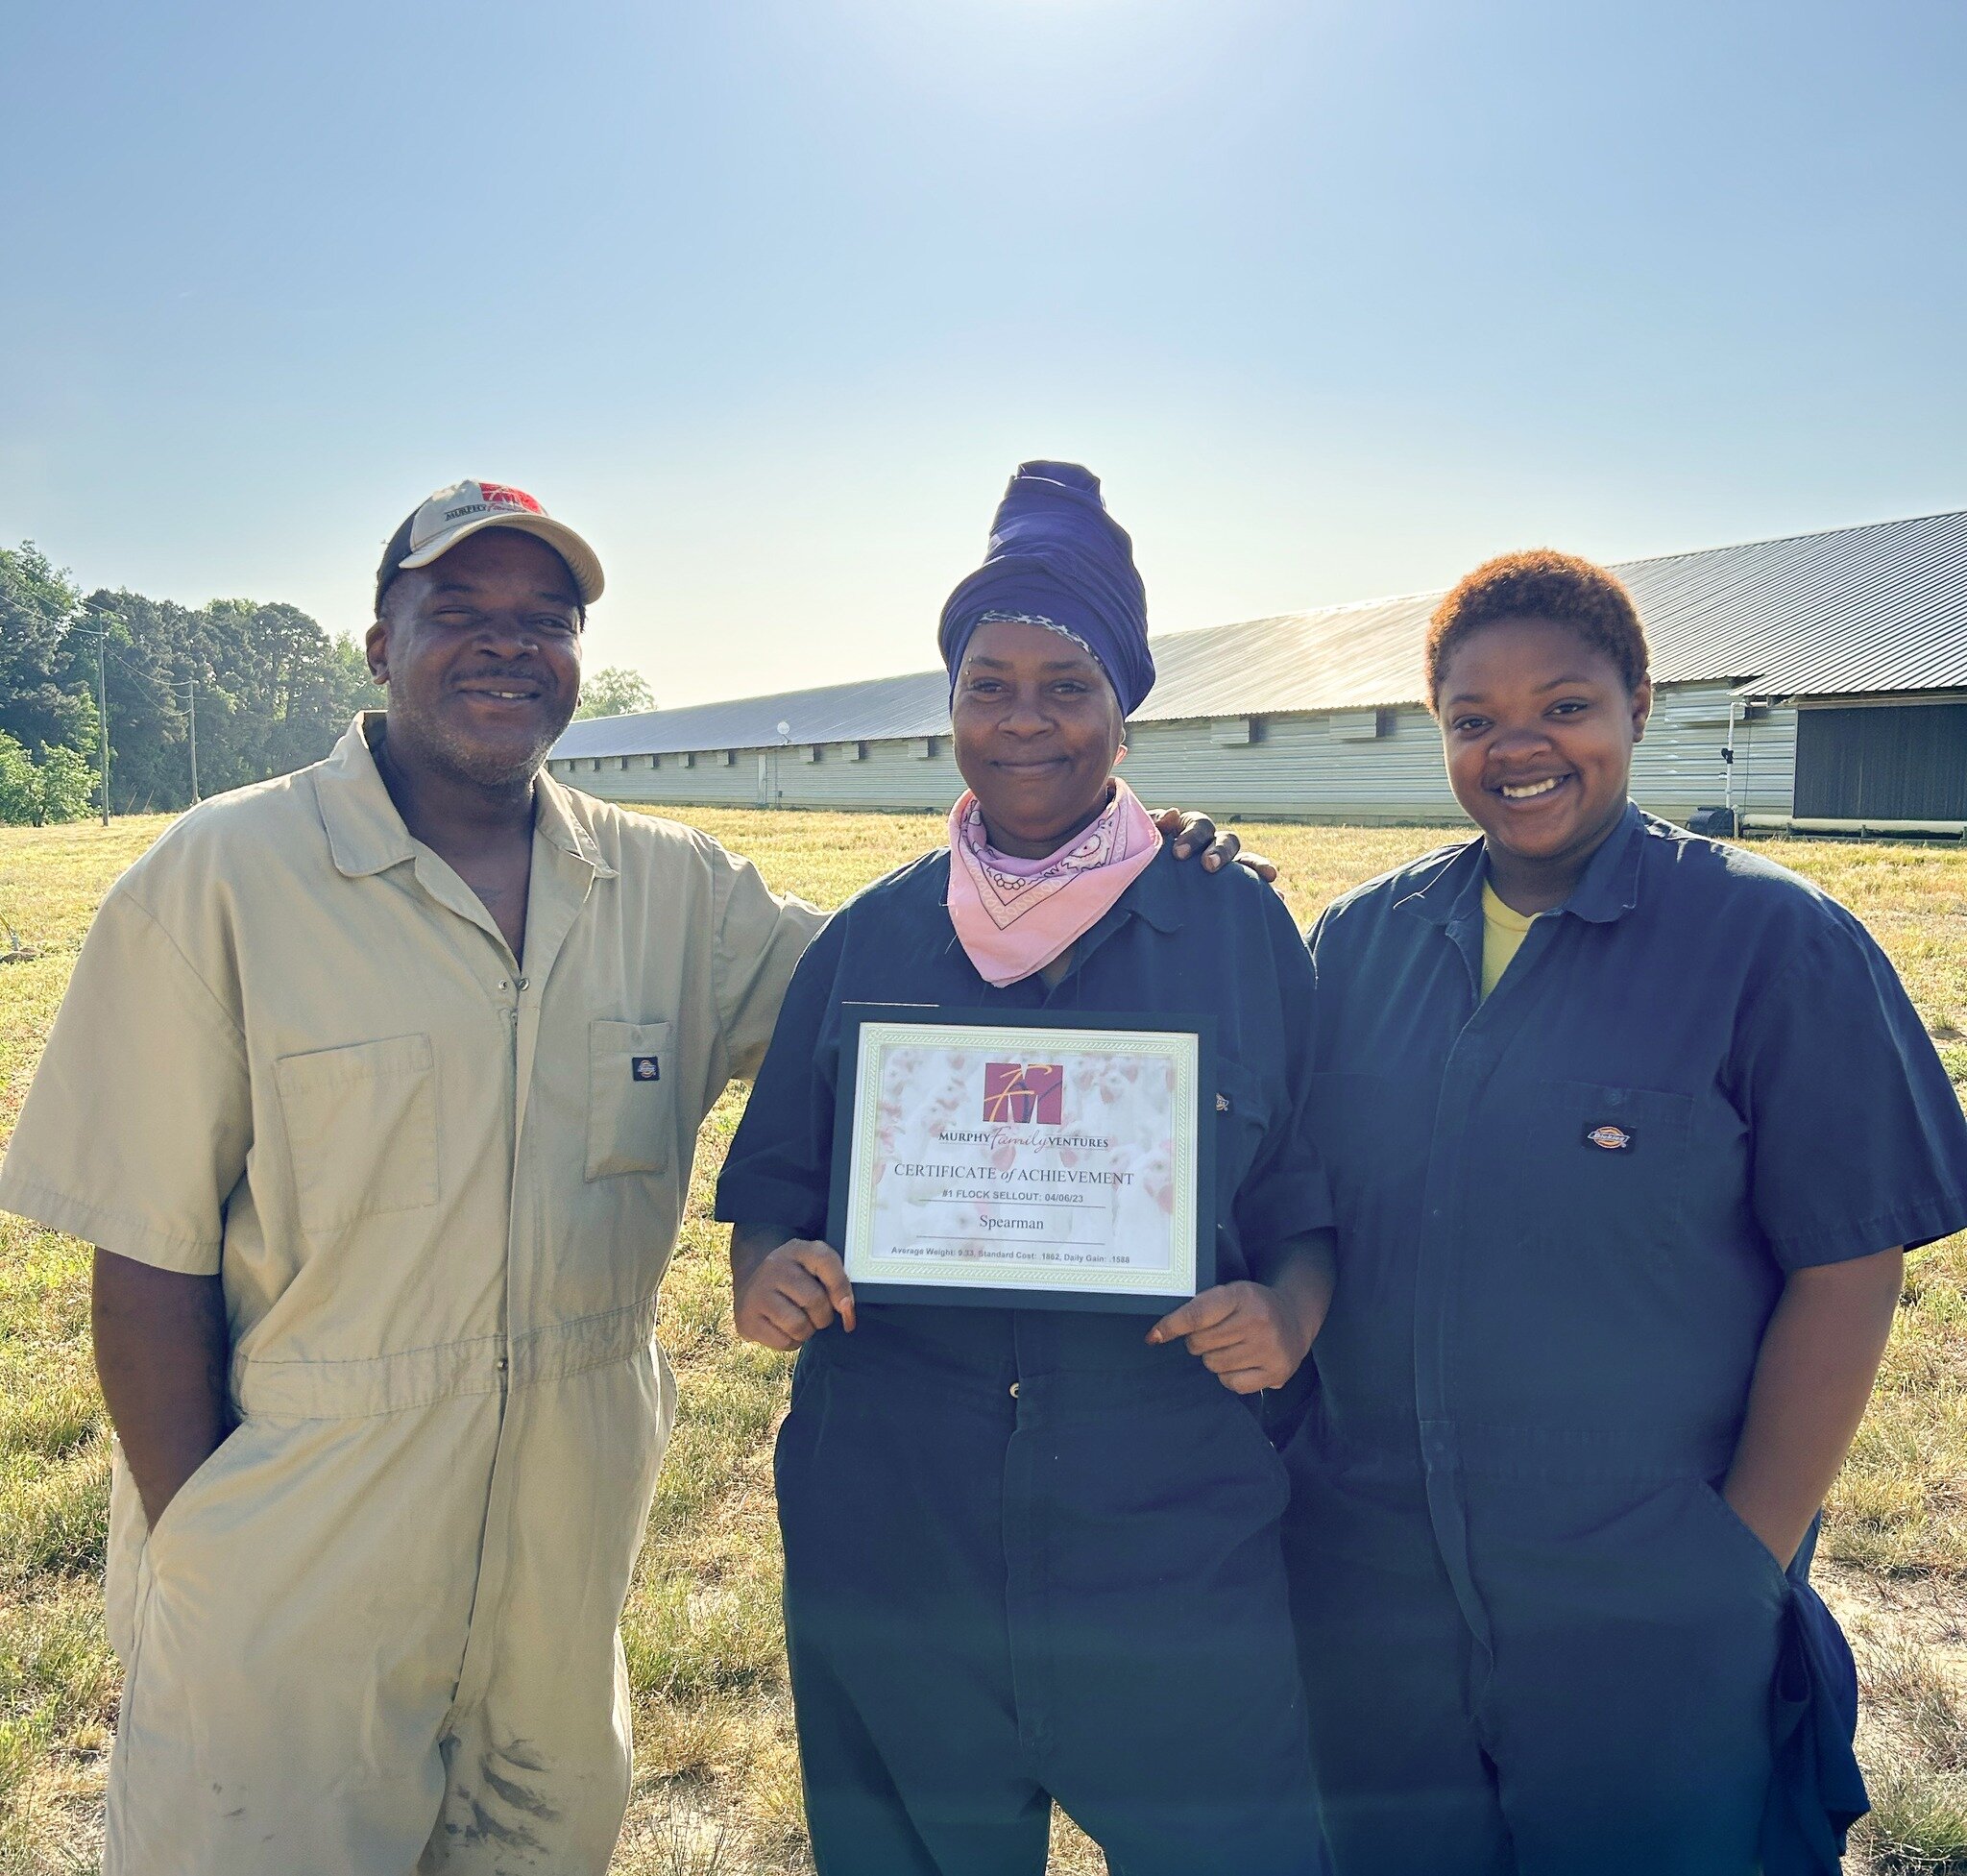 Congratulations to the Spearman Farm team who recently earned a 1st place closeout certificate! Pictured from left to right is Eric Thompson, Farm Manager Lummetta &quot;Lulu&quot; Williams, and Taitana Barden.

#MurphyFamilyVentures #EmployeeAppreci